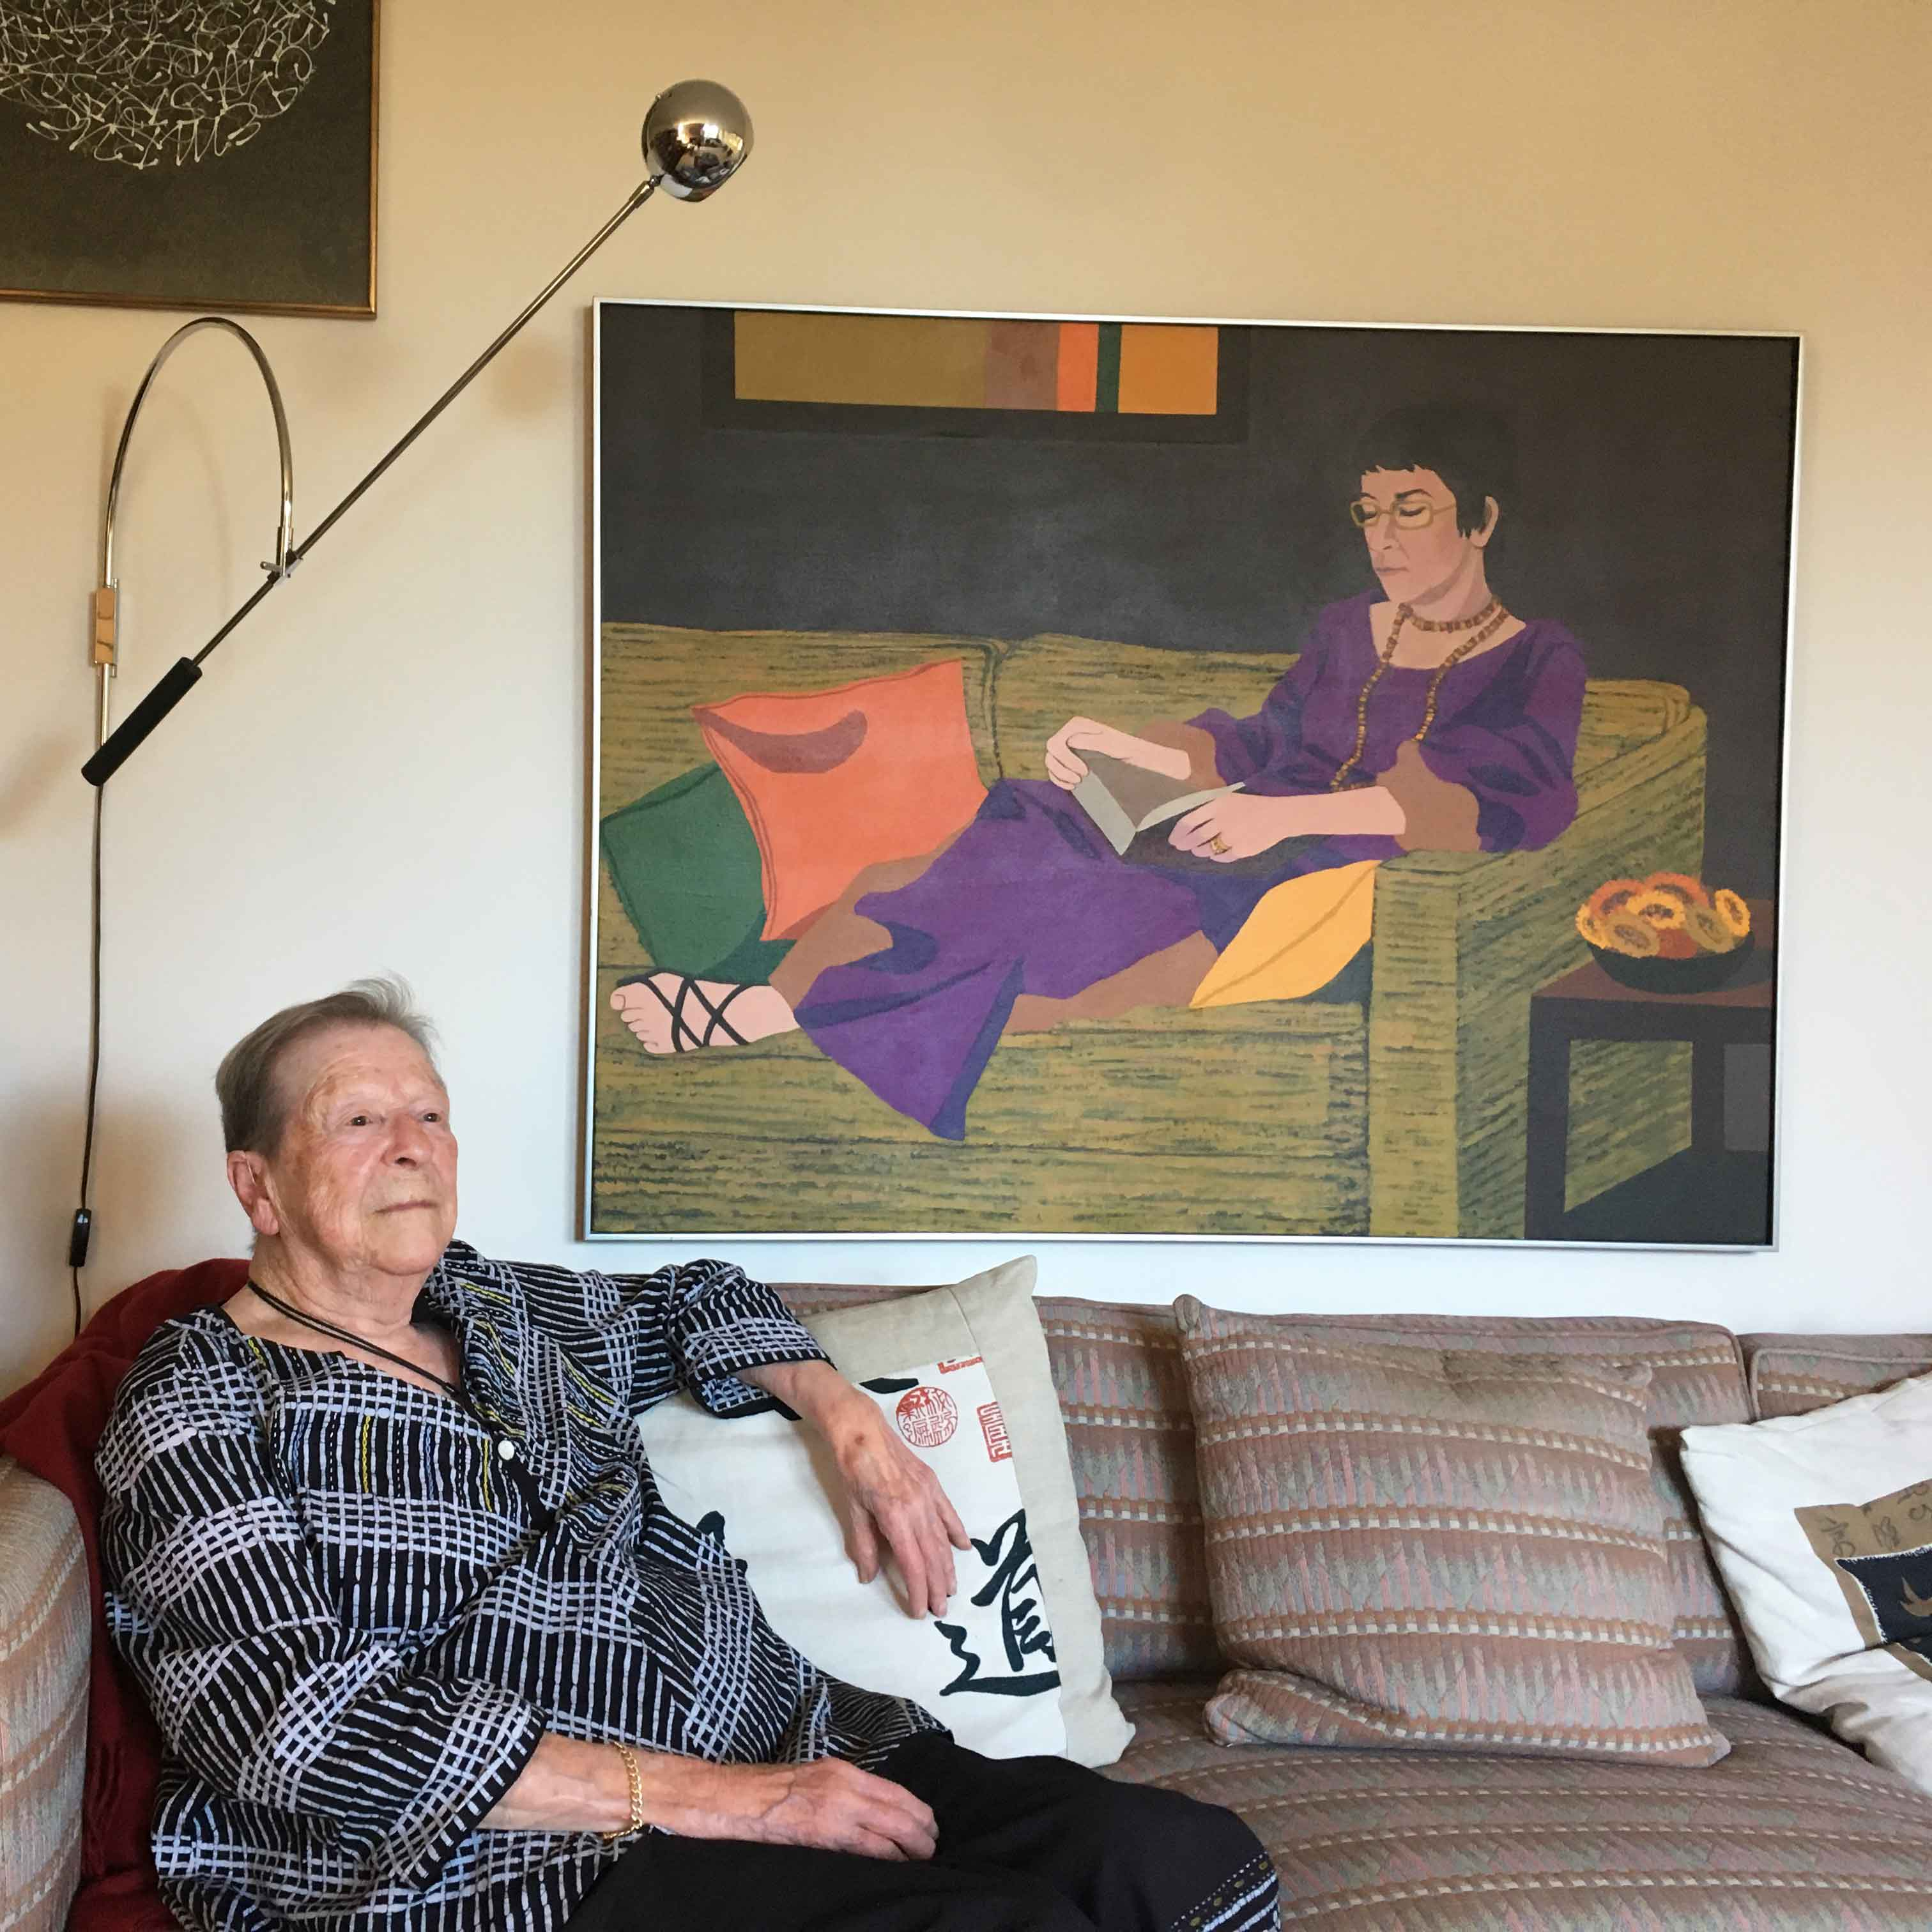 Professor Angela Little sits on a couch in front of a painting